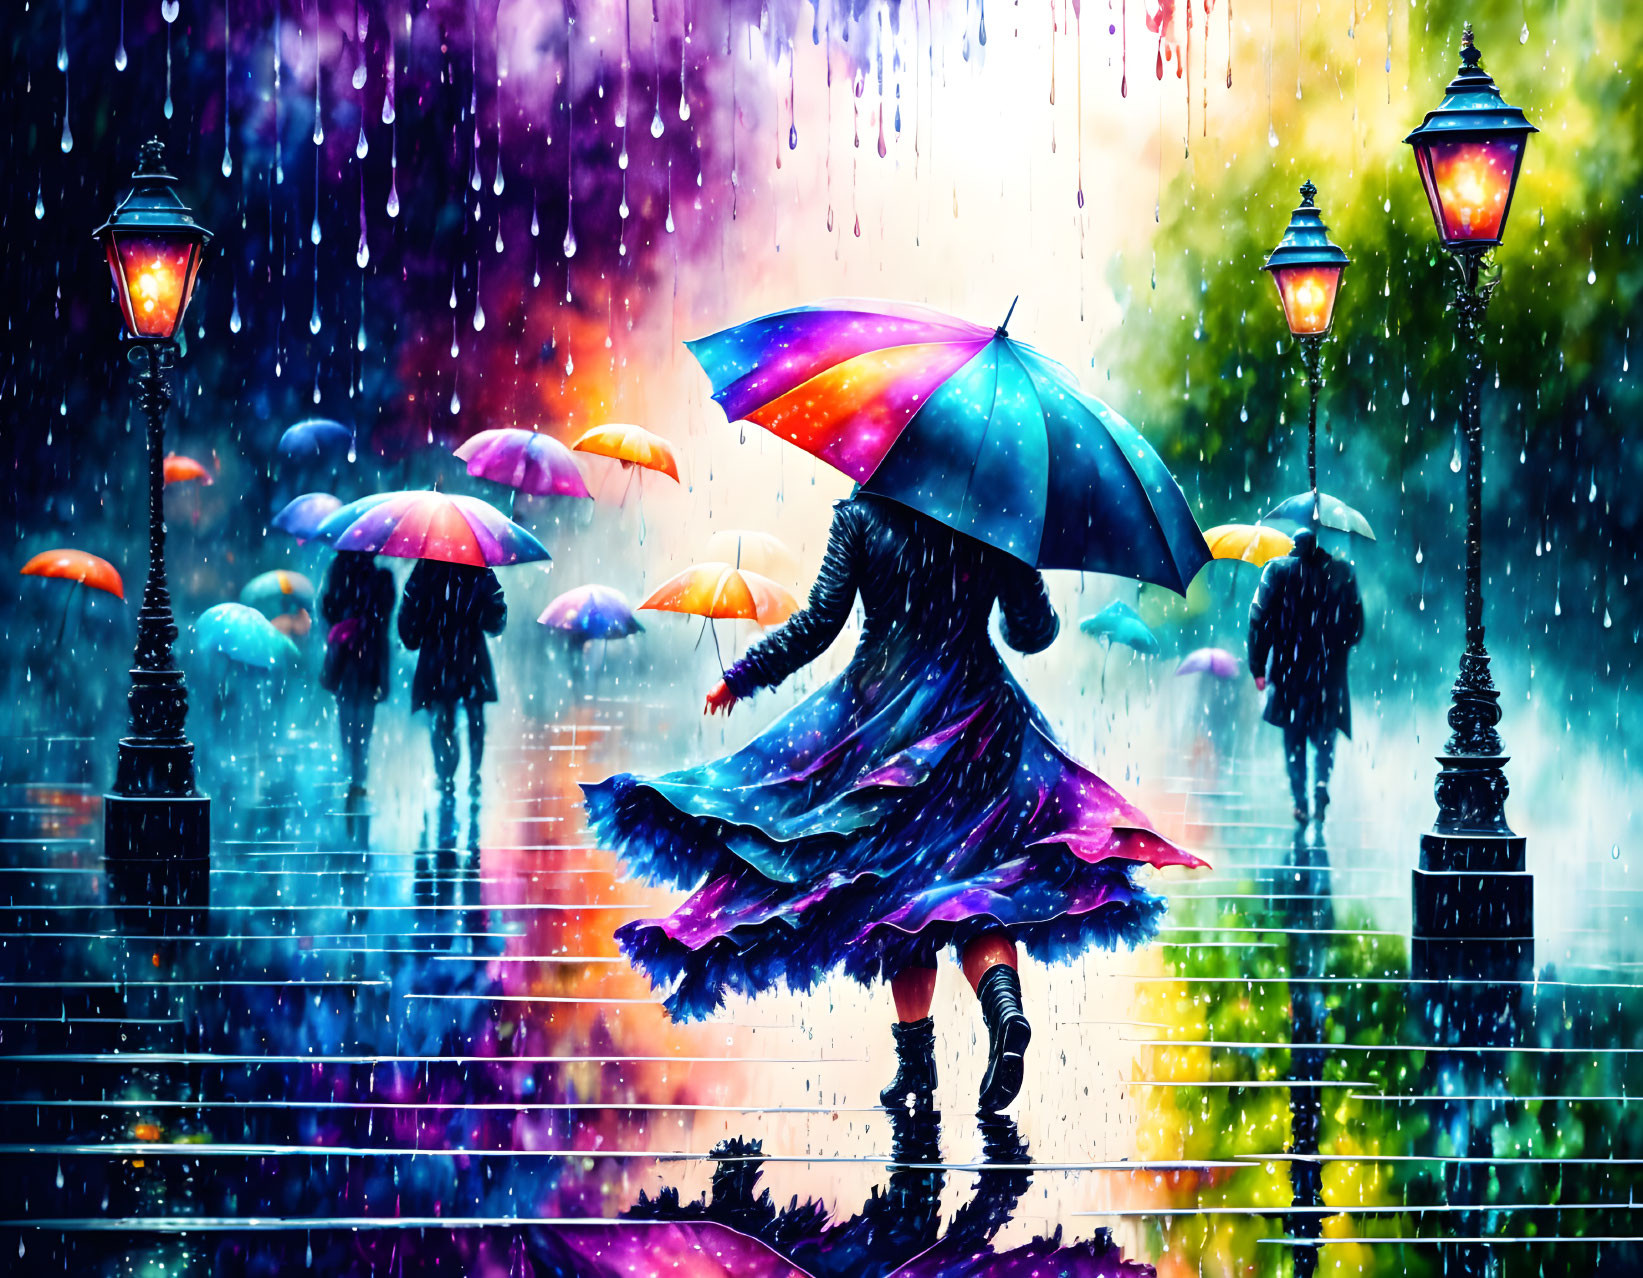 Colorful painting of person with umbrella on rain-soaked street at night